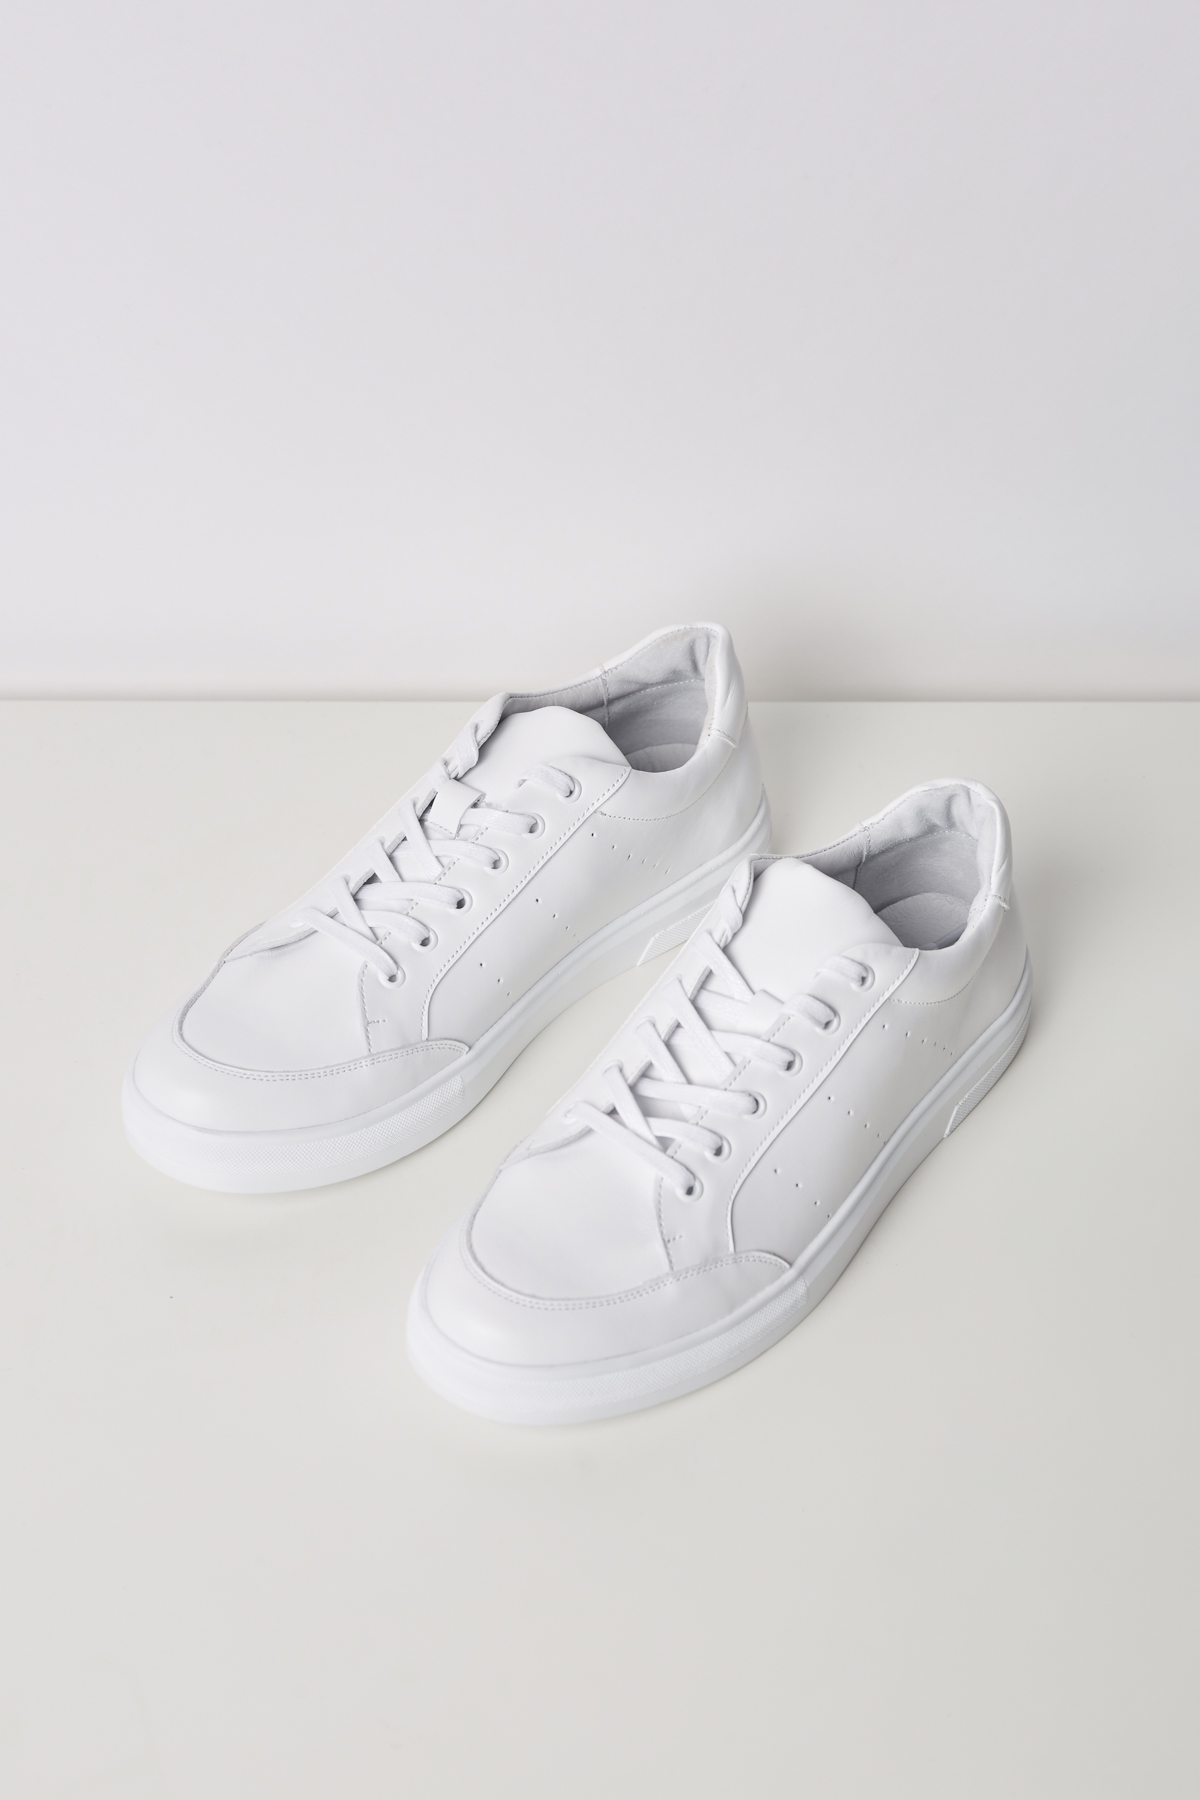 White leather sneakers, photo 3